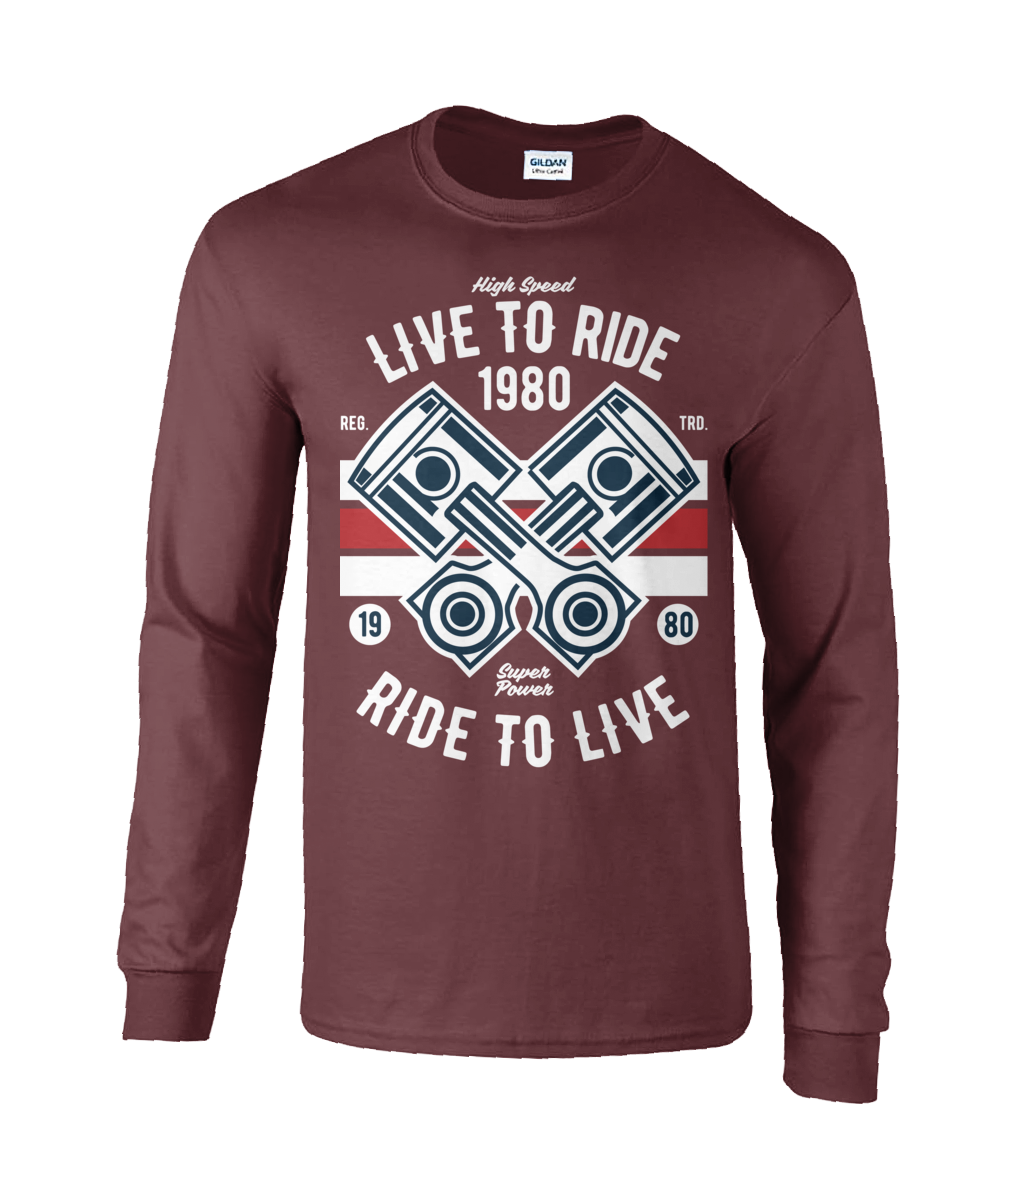 Live To Ride 1980 – Ultra Cotton Long Sleeve T-shirt